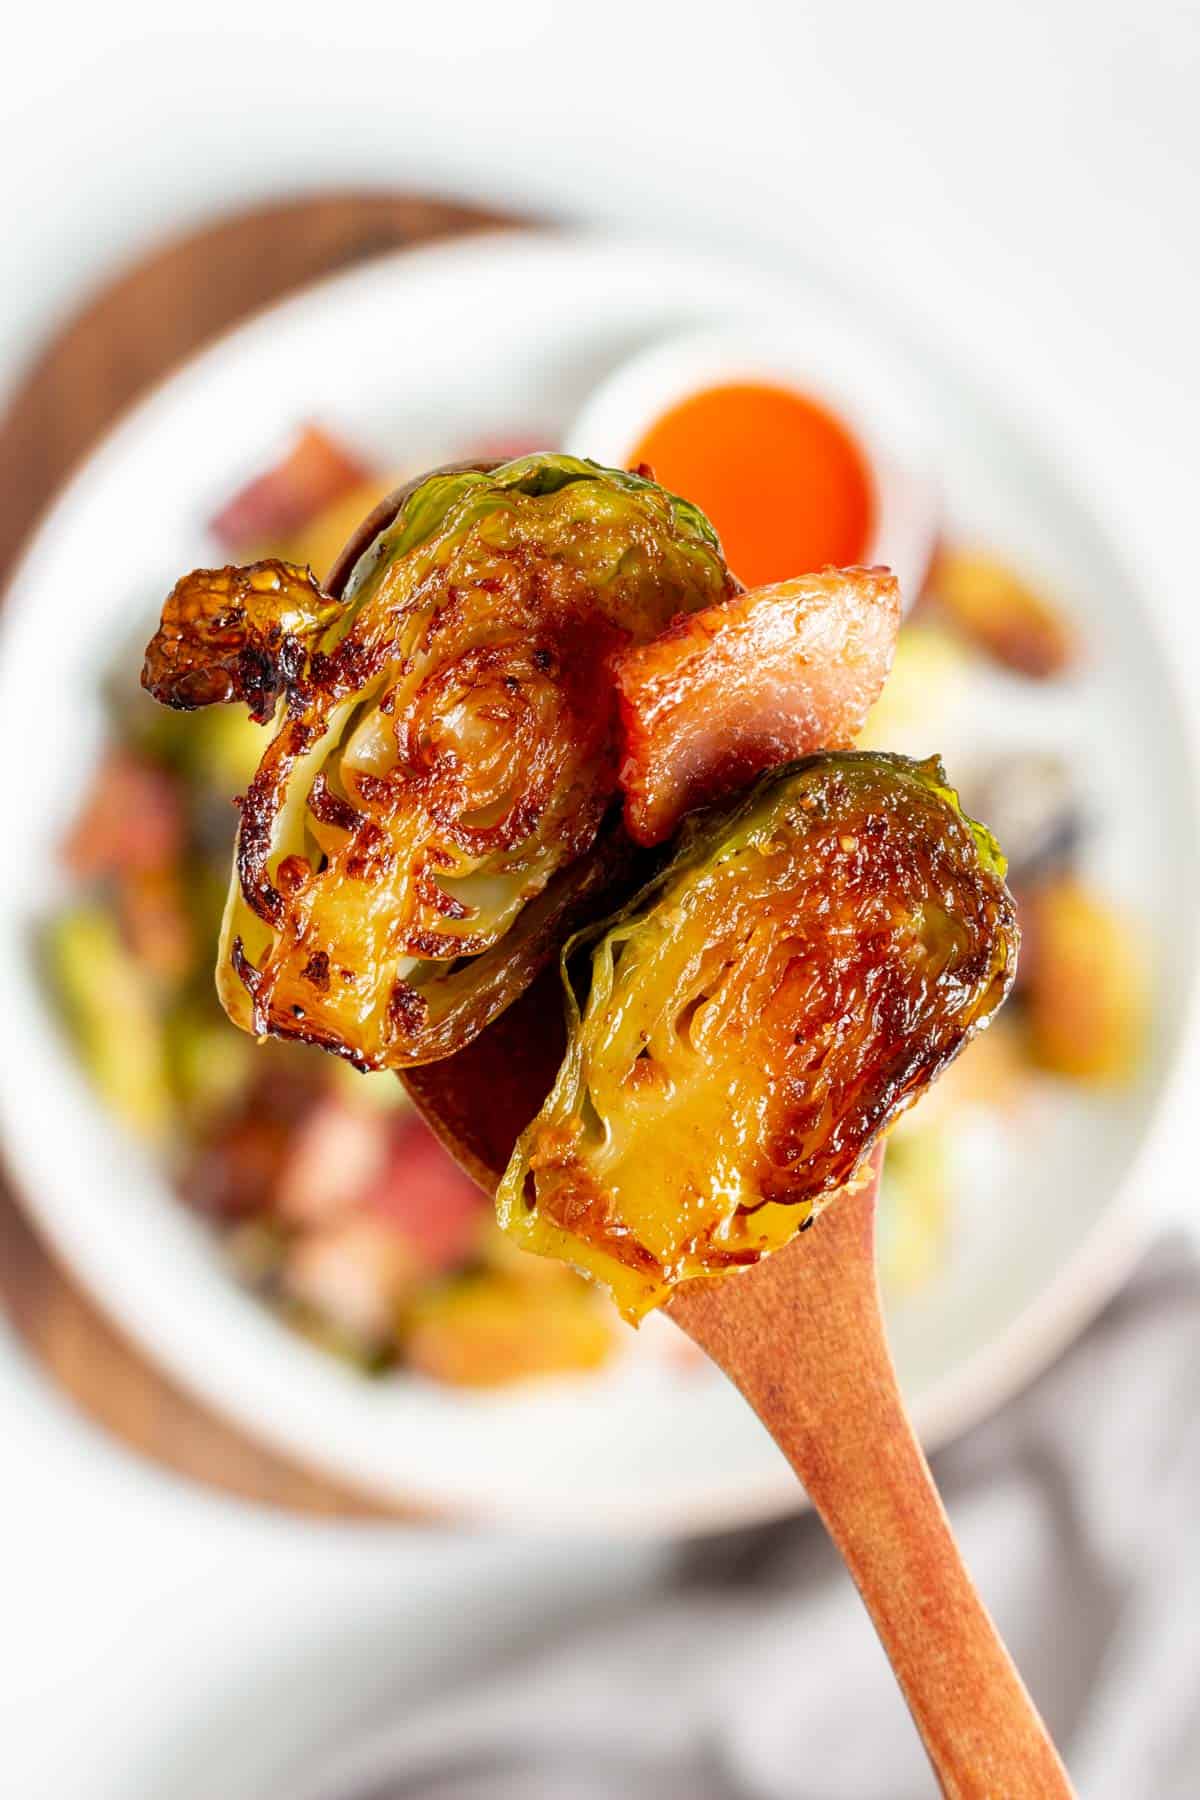 A spoonful of roasted brussels sprouts with bacon lifted from a plate.